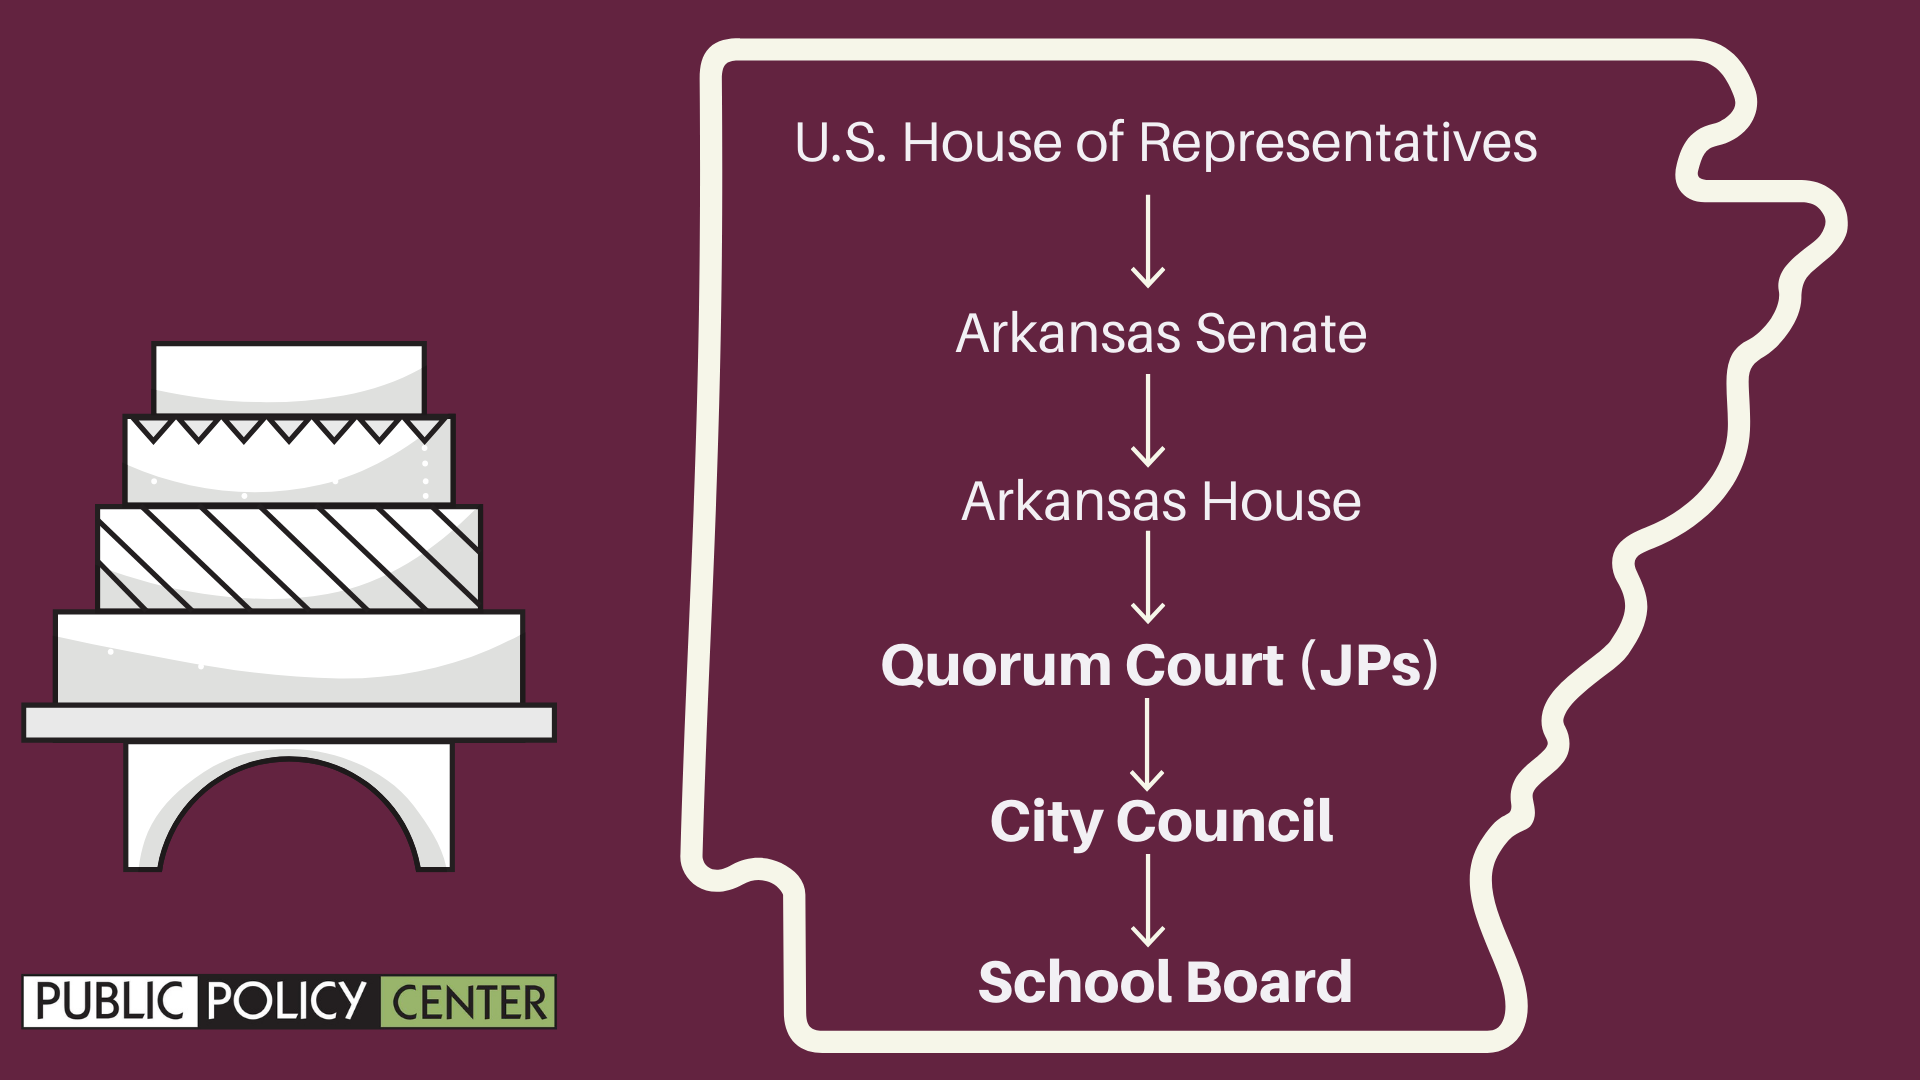 A presentation slide from the panel discussion showing a four-layer cake. To the right side of the cake is an outline of Arkansas. Within the state boundary are levels of government in Arkansas. Reading from the top down, U.S. House of Representatives, Arkansas Senate, Arkansas House, Quorum Courts or Justices of the Peace, City Council, School Board